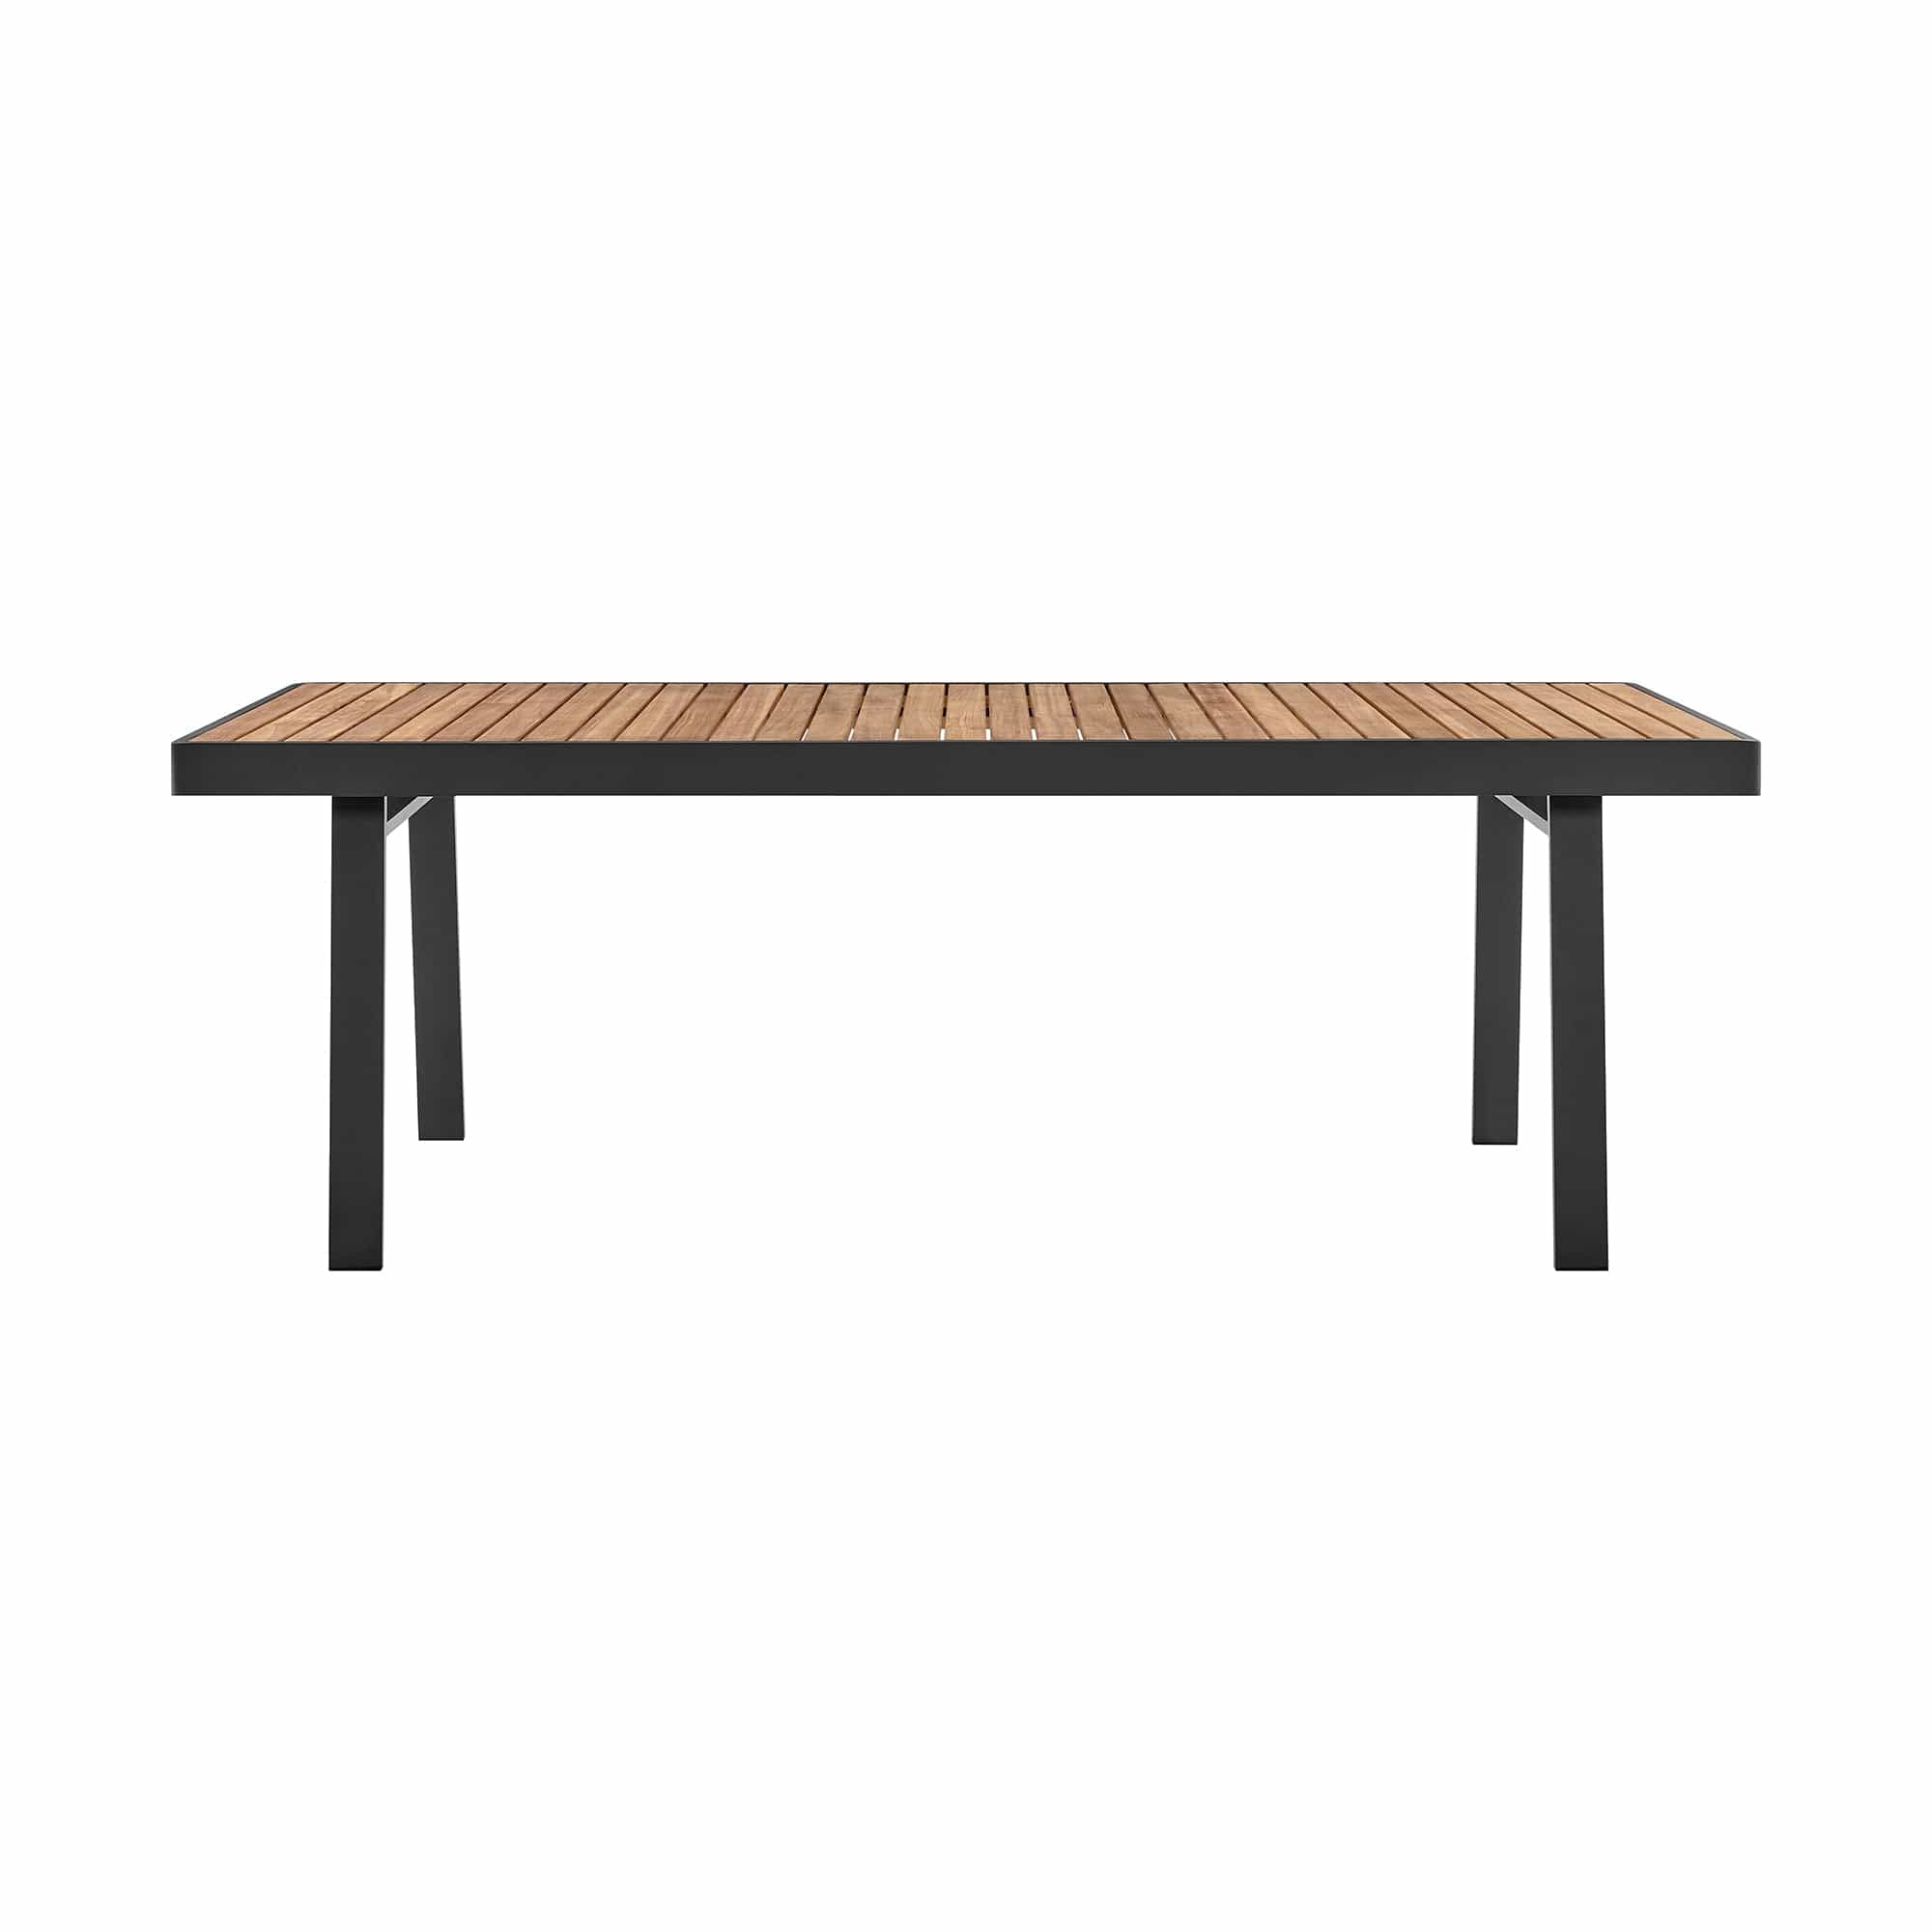 Armen Living Outdoor Dining Table Armen Living | Nofi Outdoor Patio Dining Table in Charcoal Finish with Teak Wood Top | LCNODIGR